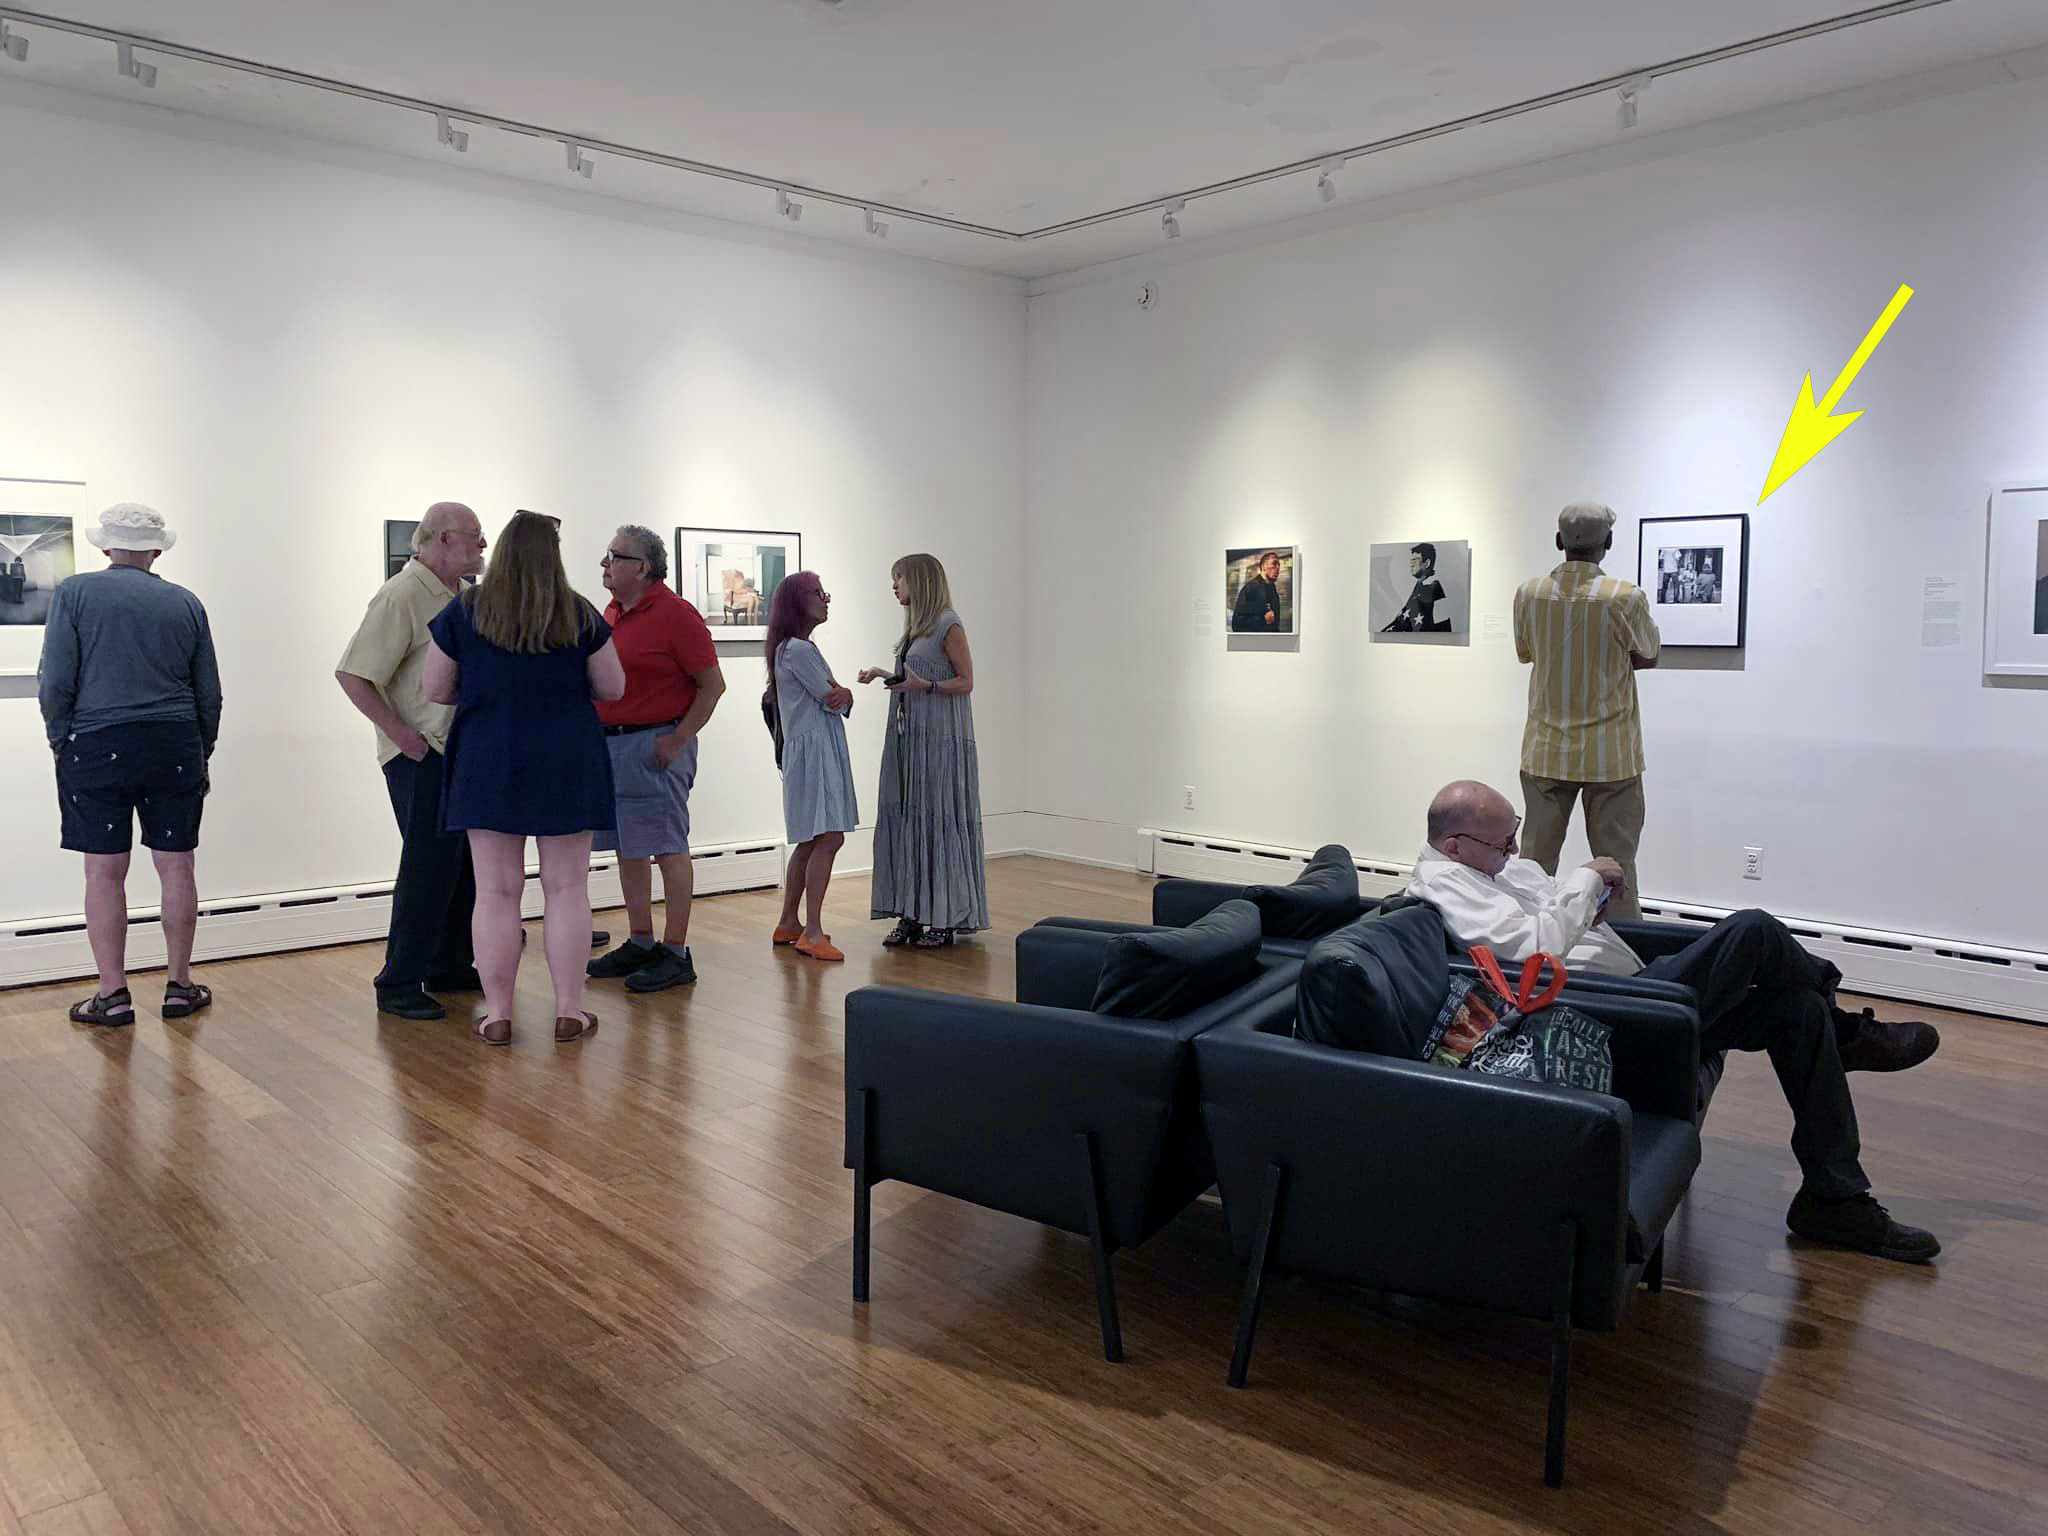 Image of museum reception for photography exhibition. Exhibition photos are arranged on the walls and clumps of people stand before them, alternatively talking amongst themselves and admiring the photos.